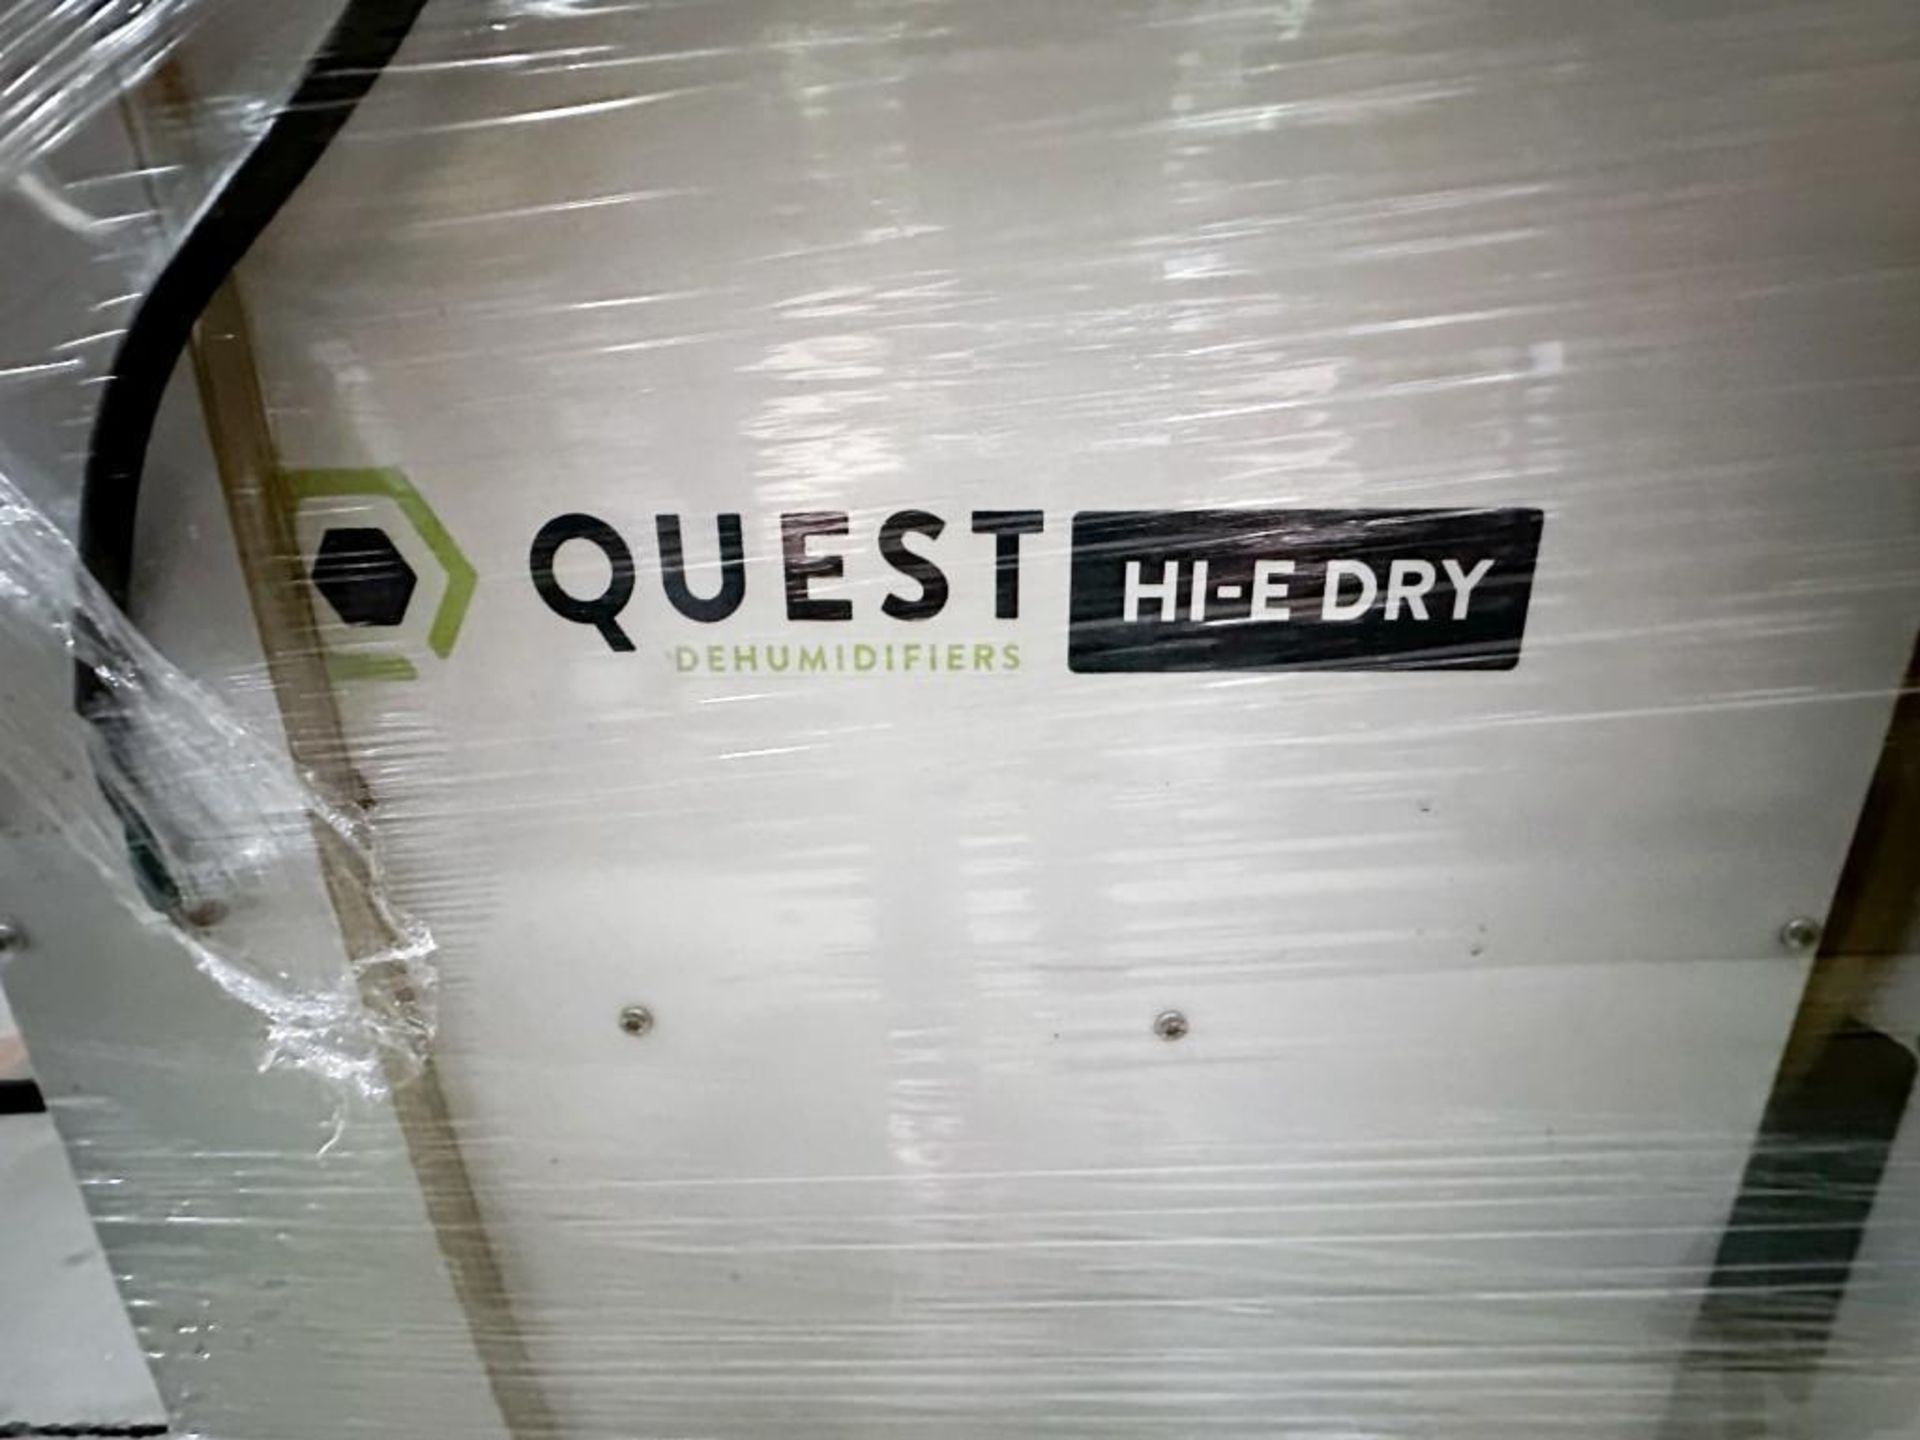 Quest Dehumidifiers MDL HI-E Dry, 4 CT - Image 6 of 9